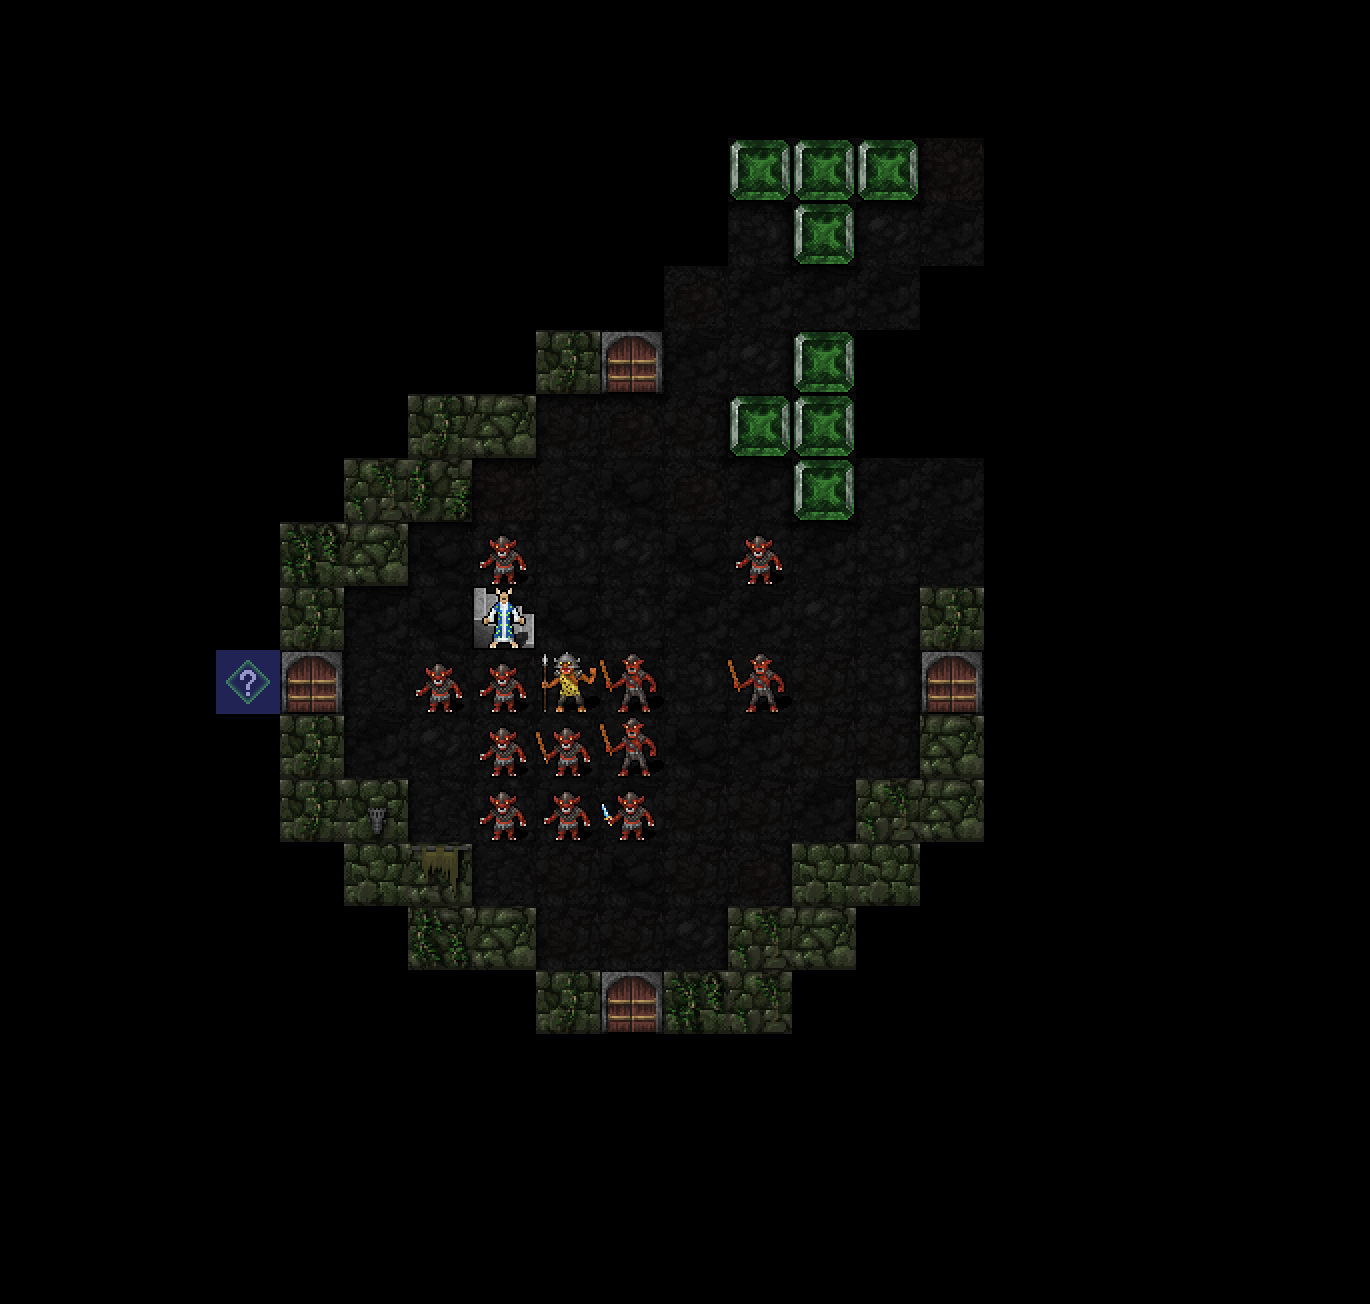 A basic 2D dungeon room, a ring of grey bricks on a black background. A minotaur is on stairs surrounded by 13 hobgoblins.